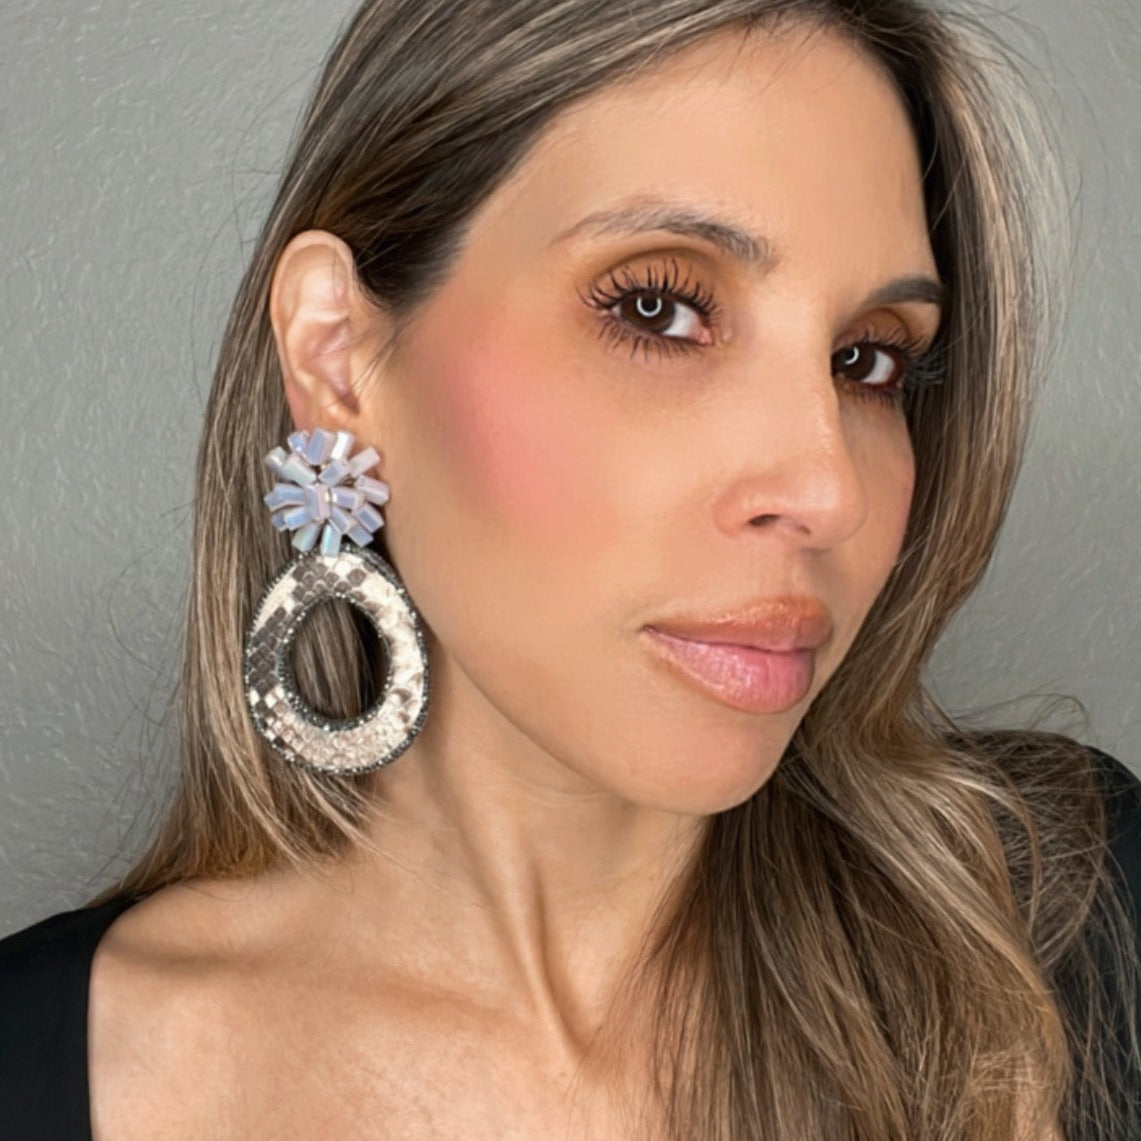 Orchid Python Sterling Silver Statement Earrings - Born To Glam